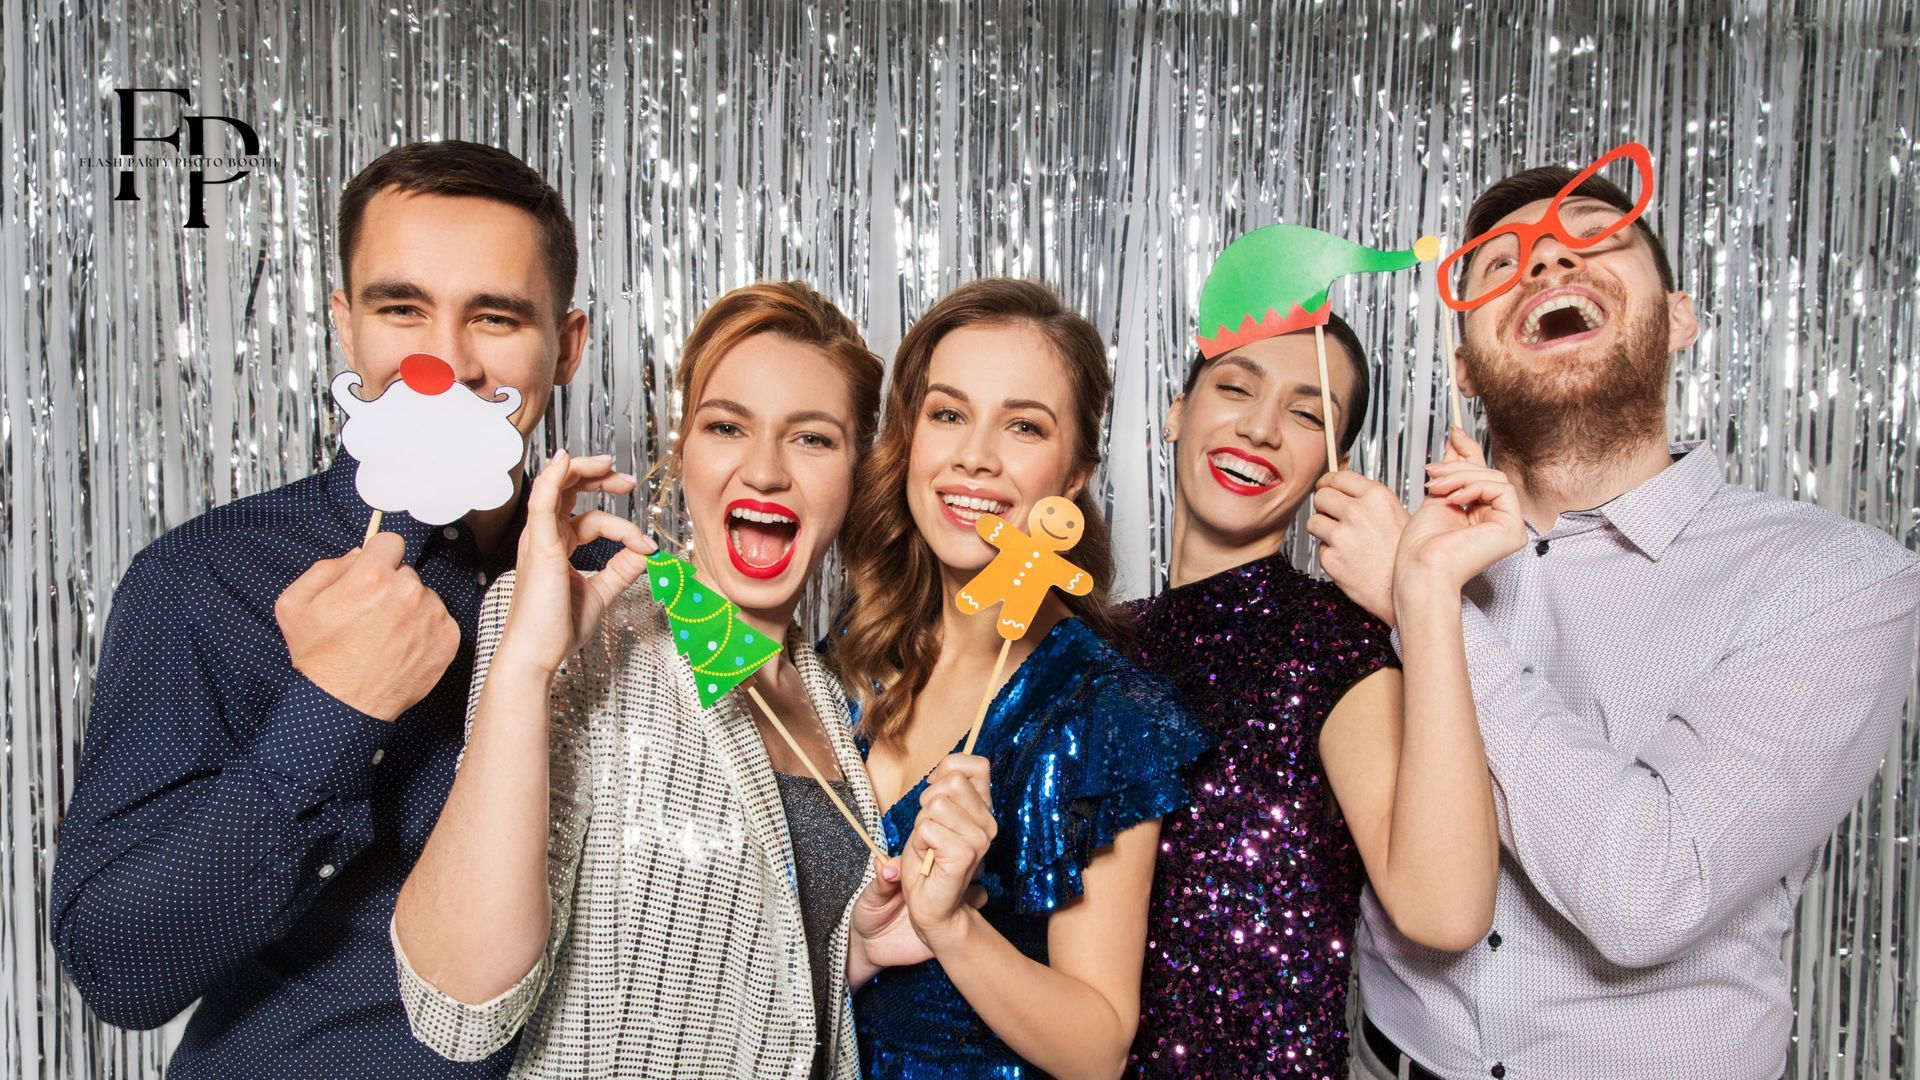 Guests holding their props while posing for a photo when celebrating their company's year-end party